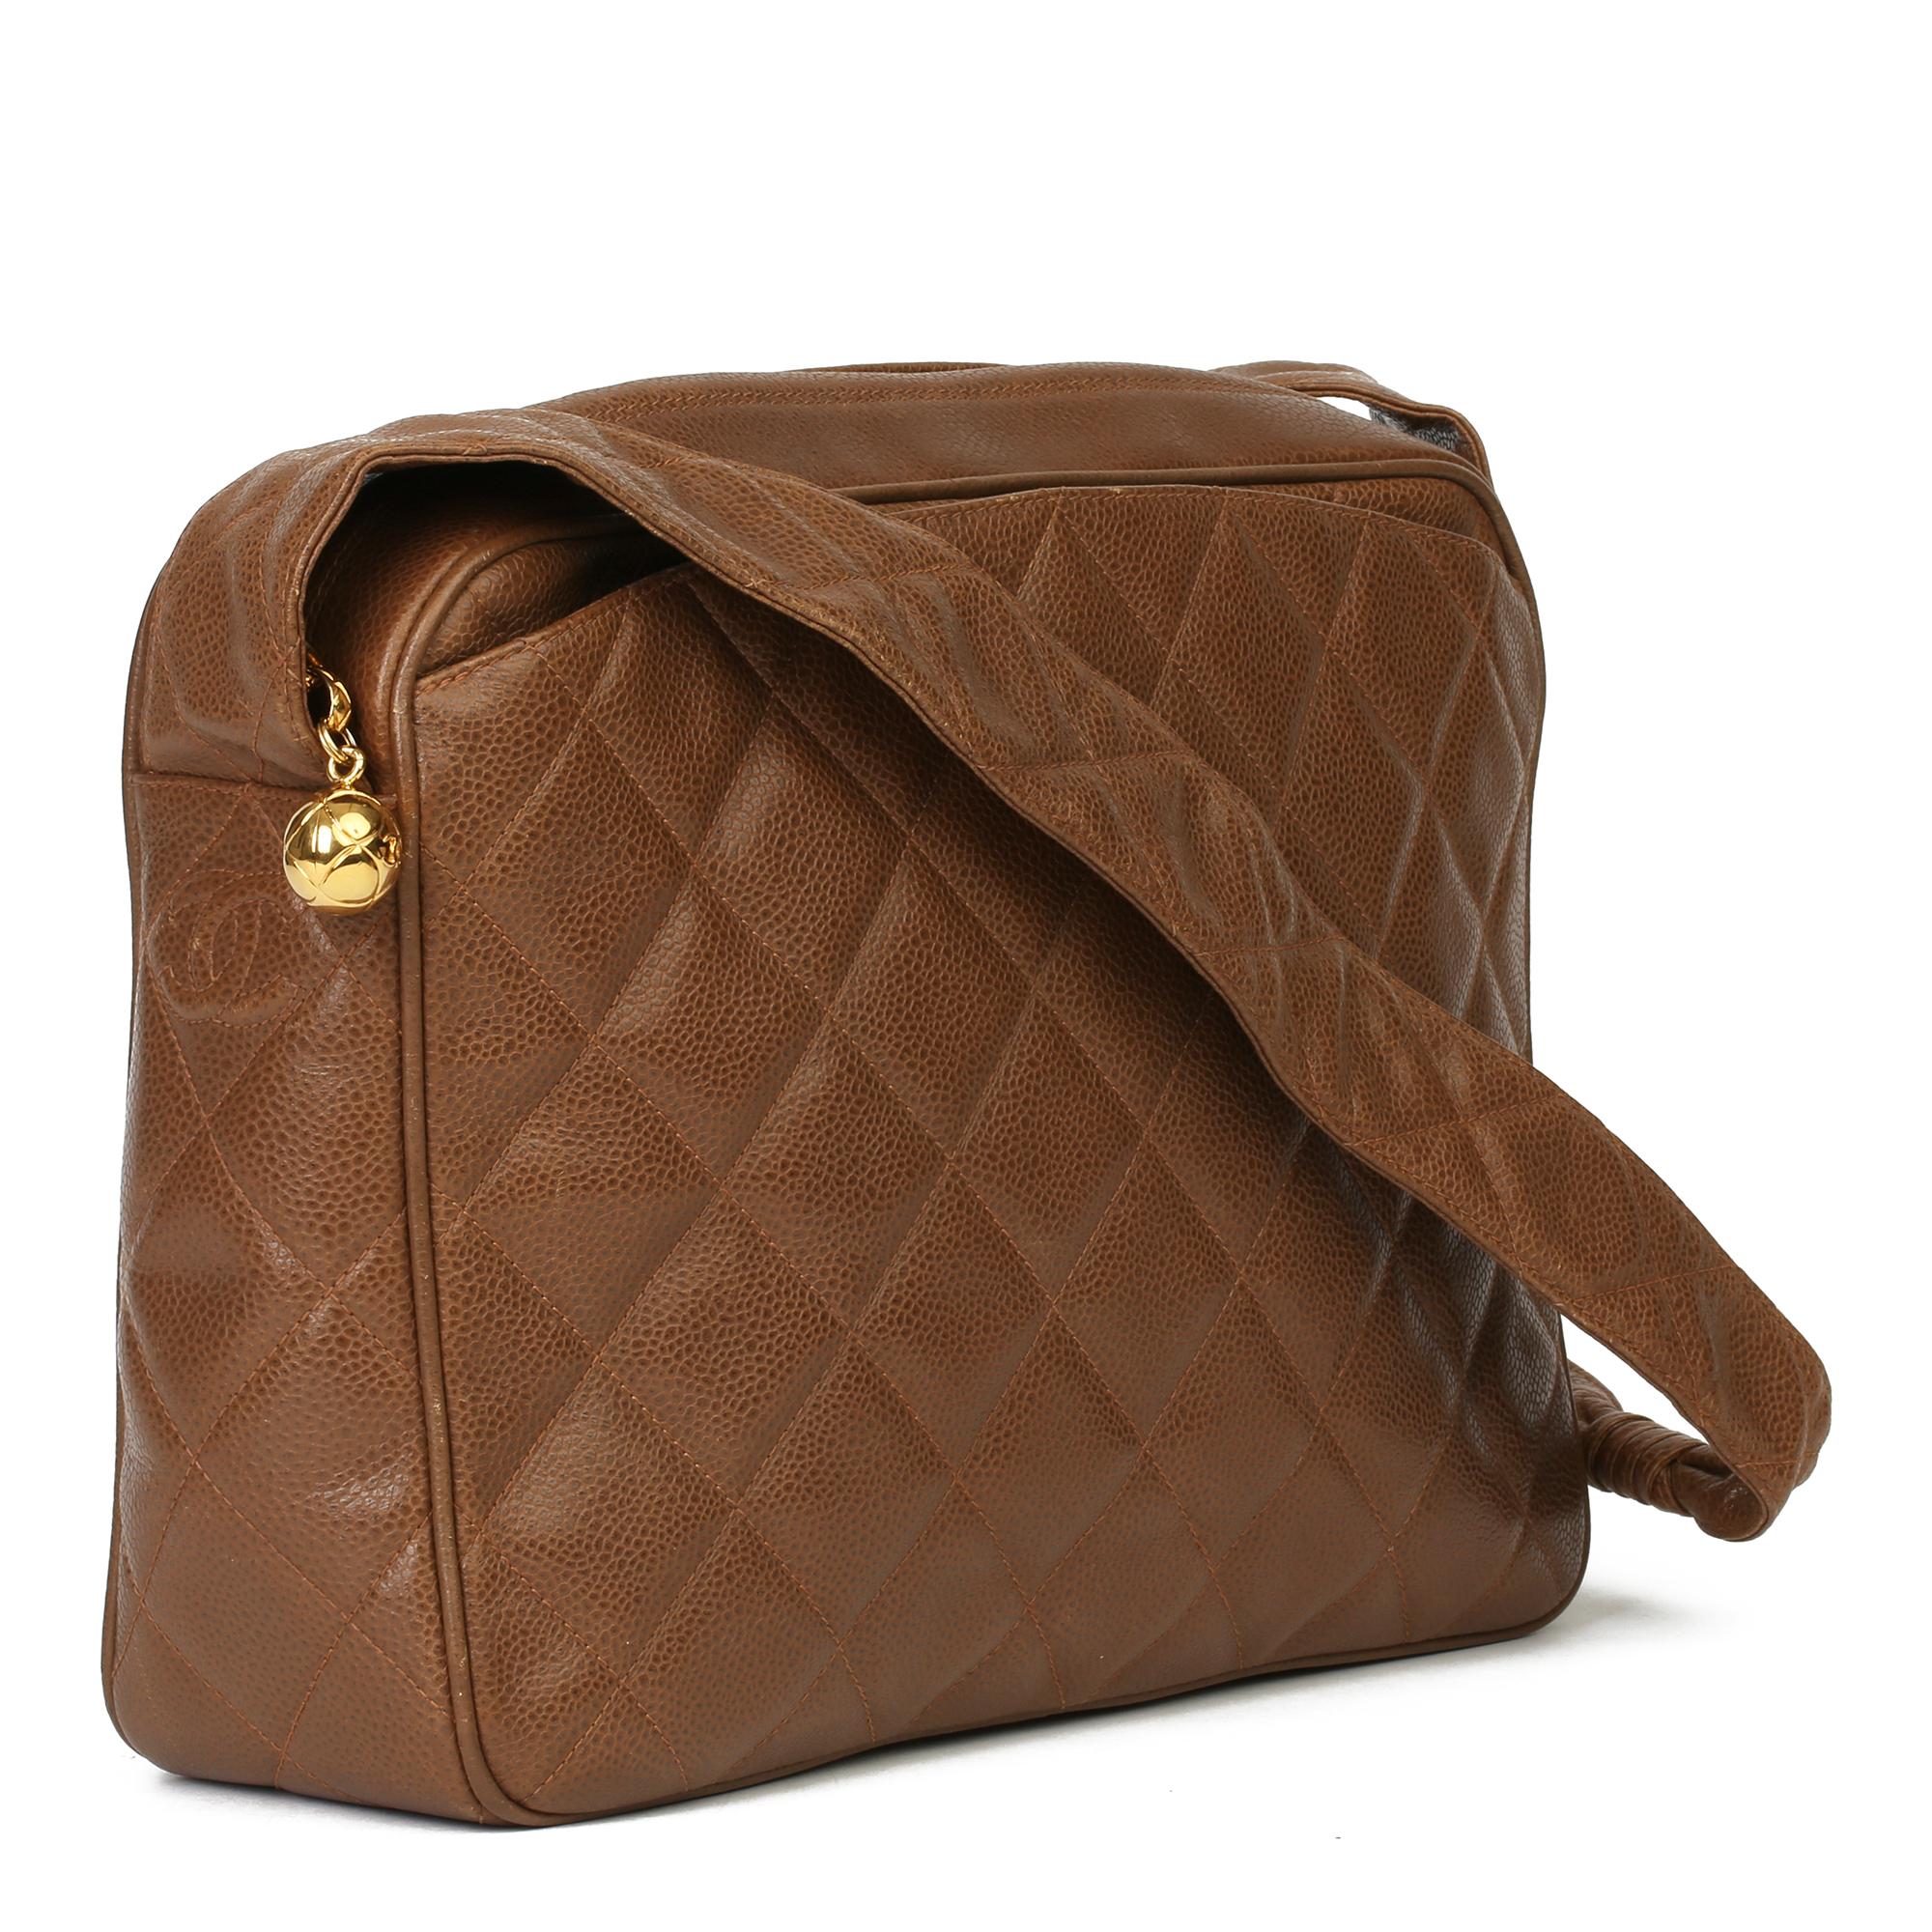 CHANEL
Brown Quilted Caviar Leather Vintage Timeless Camera Bag

Serial Number: 2943780
Age (Circa): 1994
Authenticity Details: Serial Sticker (Made in Italy) 
Gender: Ladies
Type: Shoulder

Colour: Brown
Hardware: Gold
Material(s): Caviar